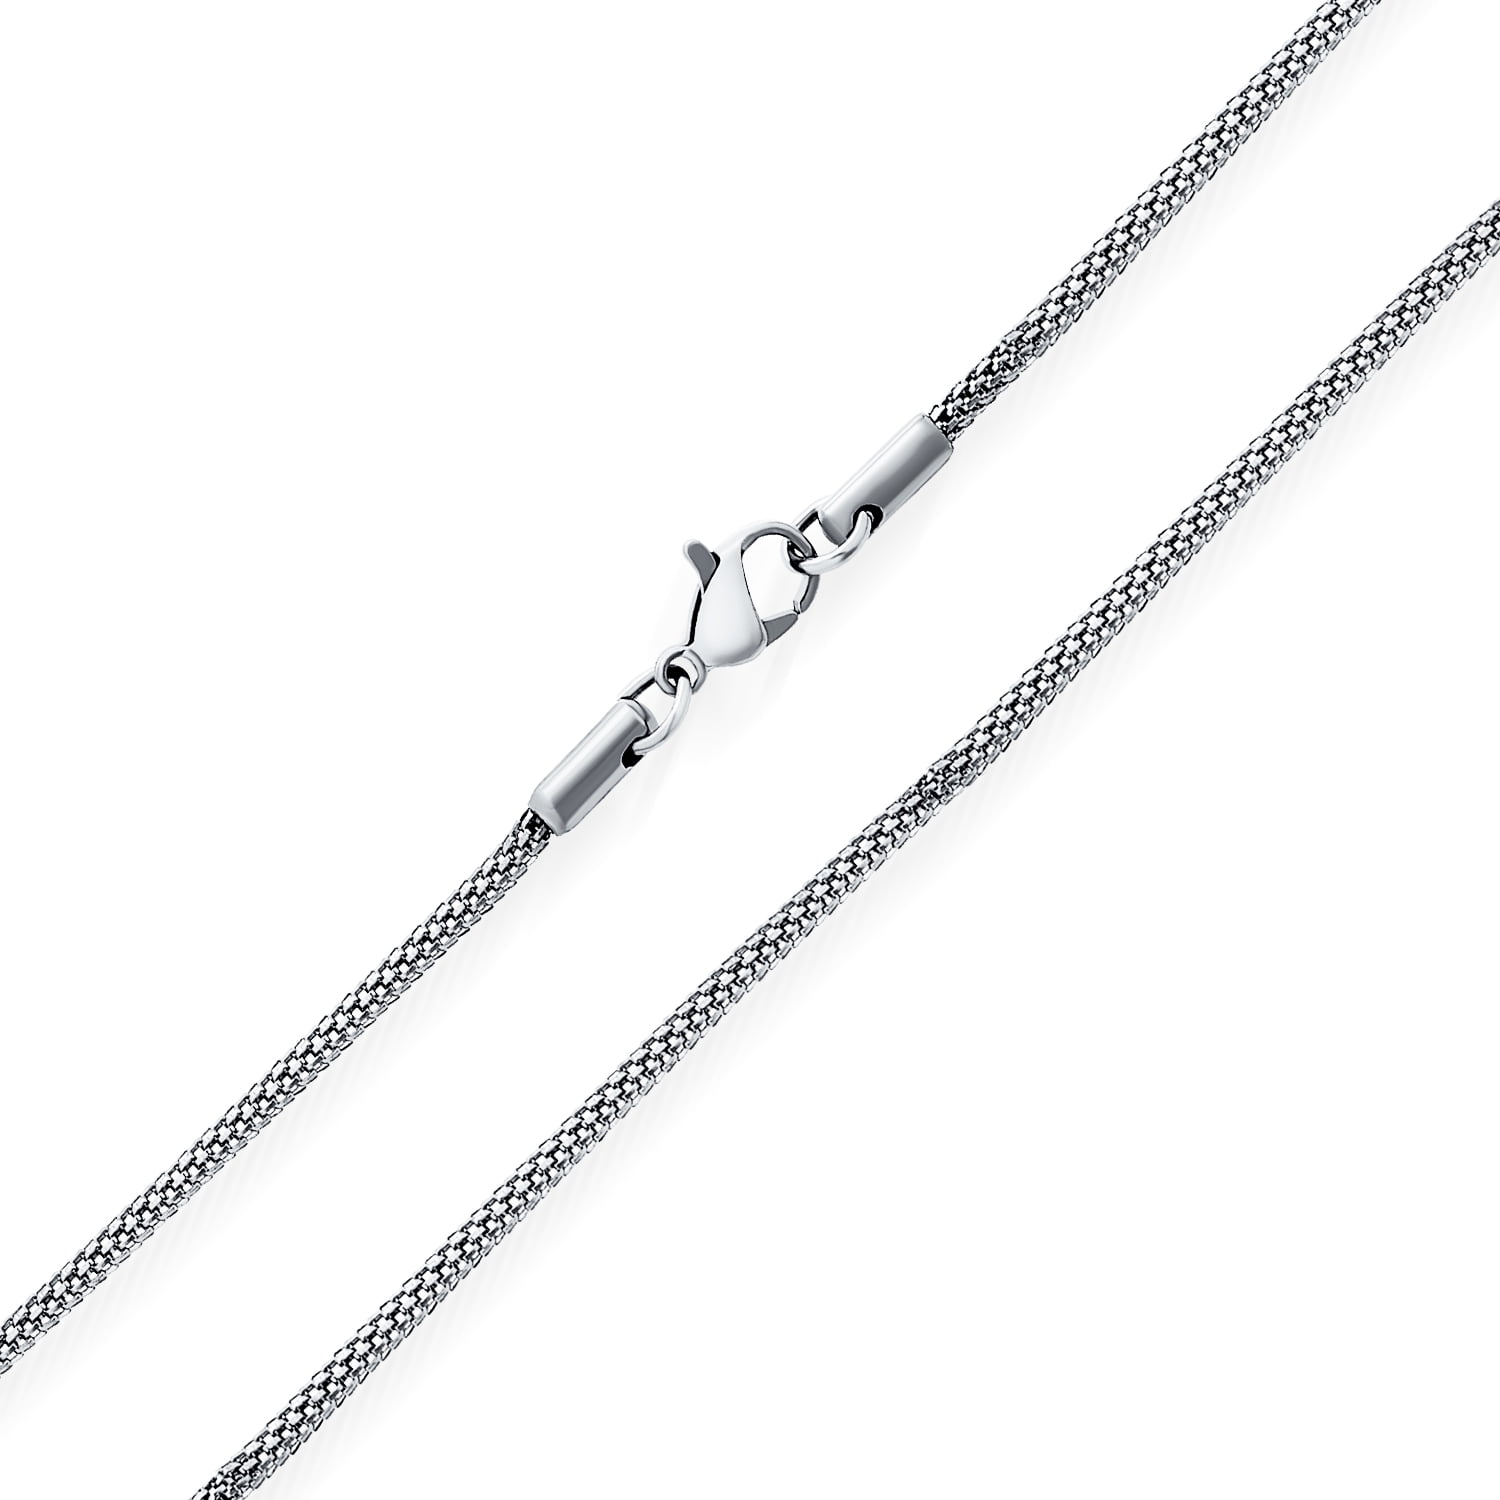 2.5-10mm Men Unisex Chain Silver Tone Stainless Steel Rolo Link Necklace 18-36'' 